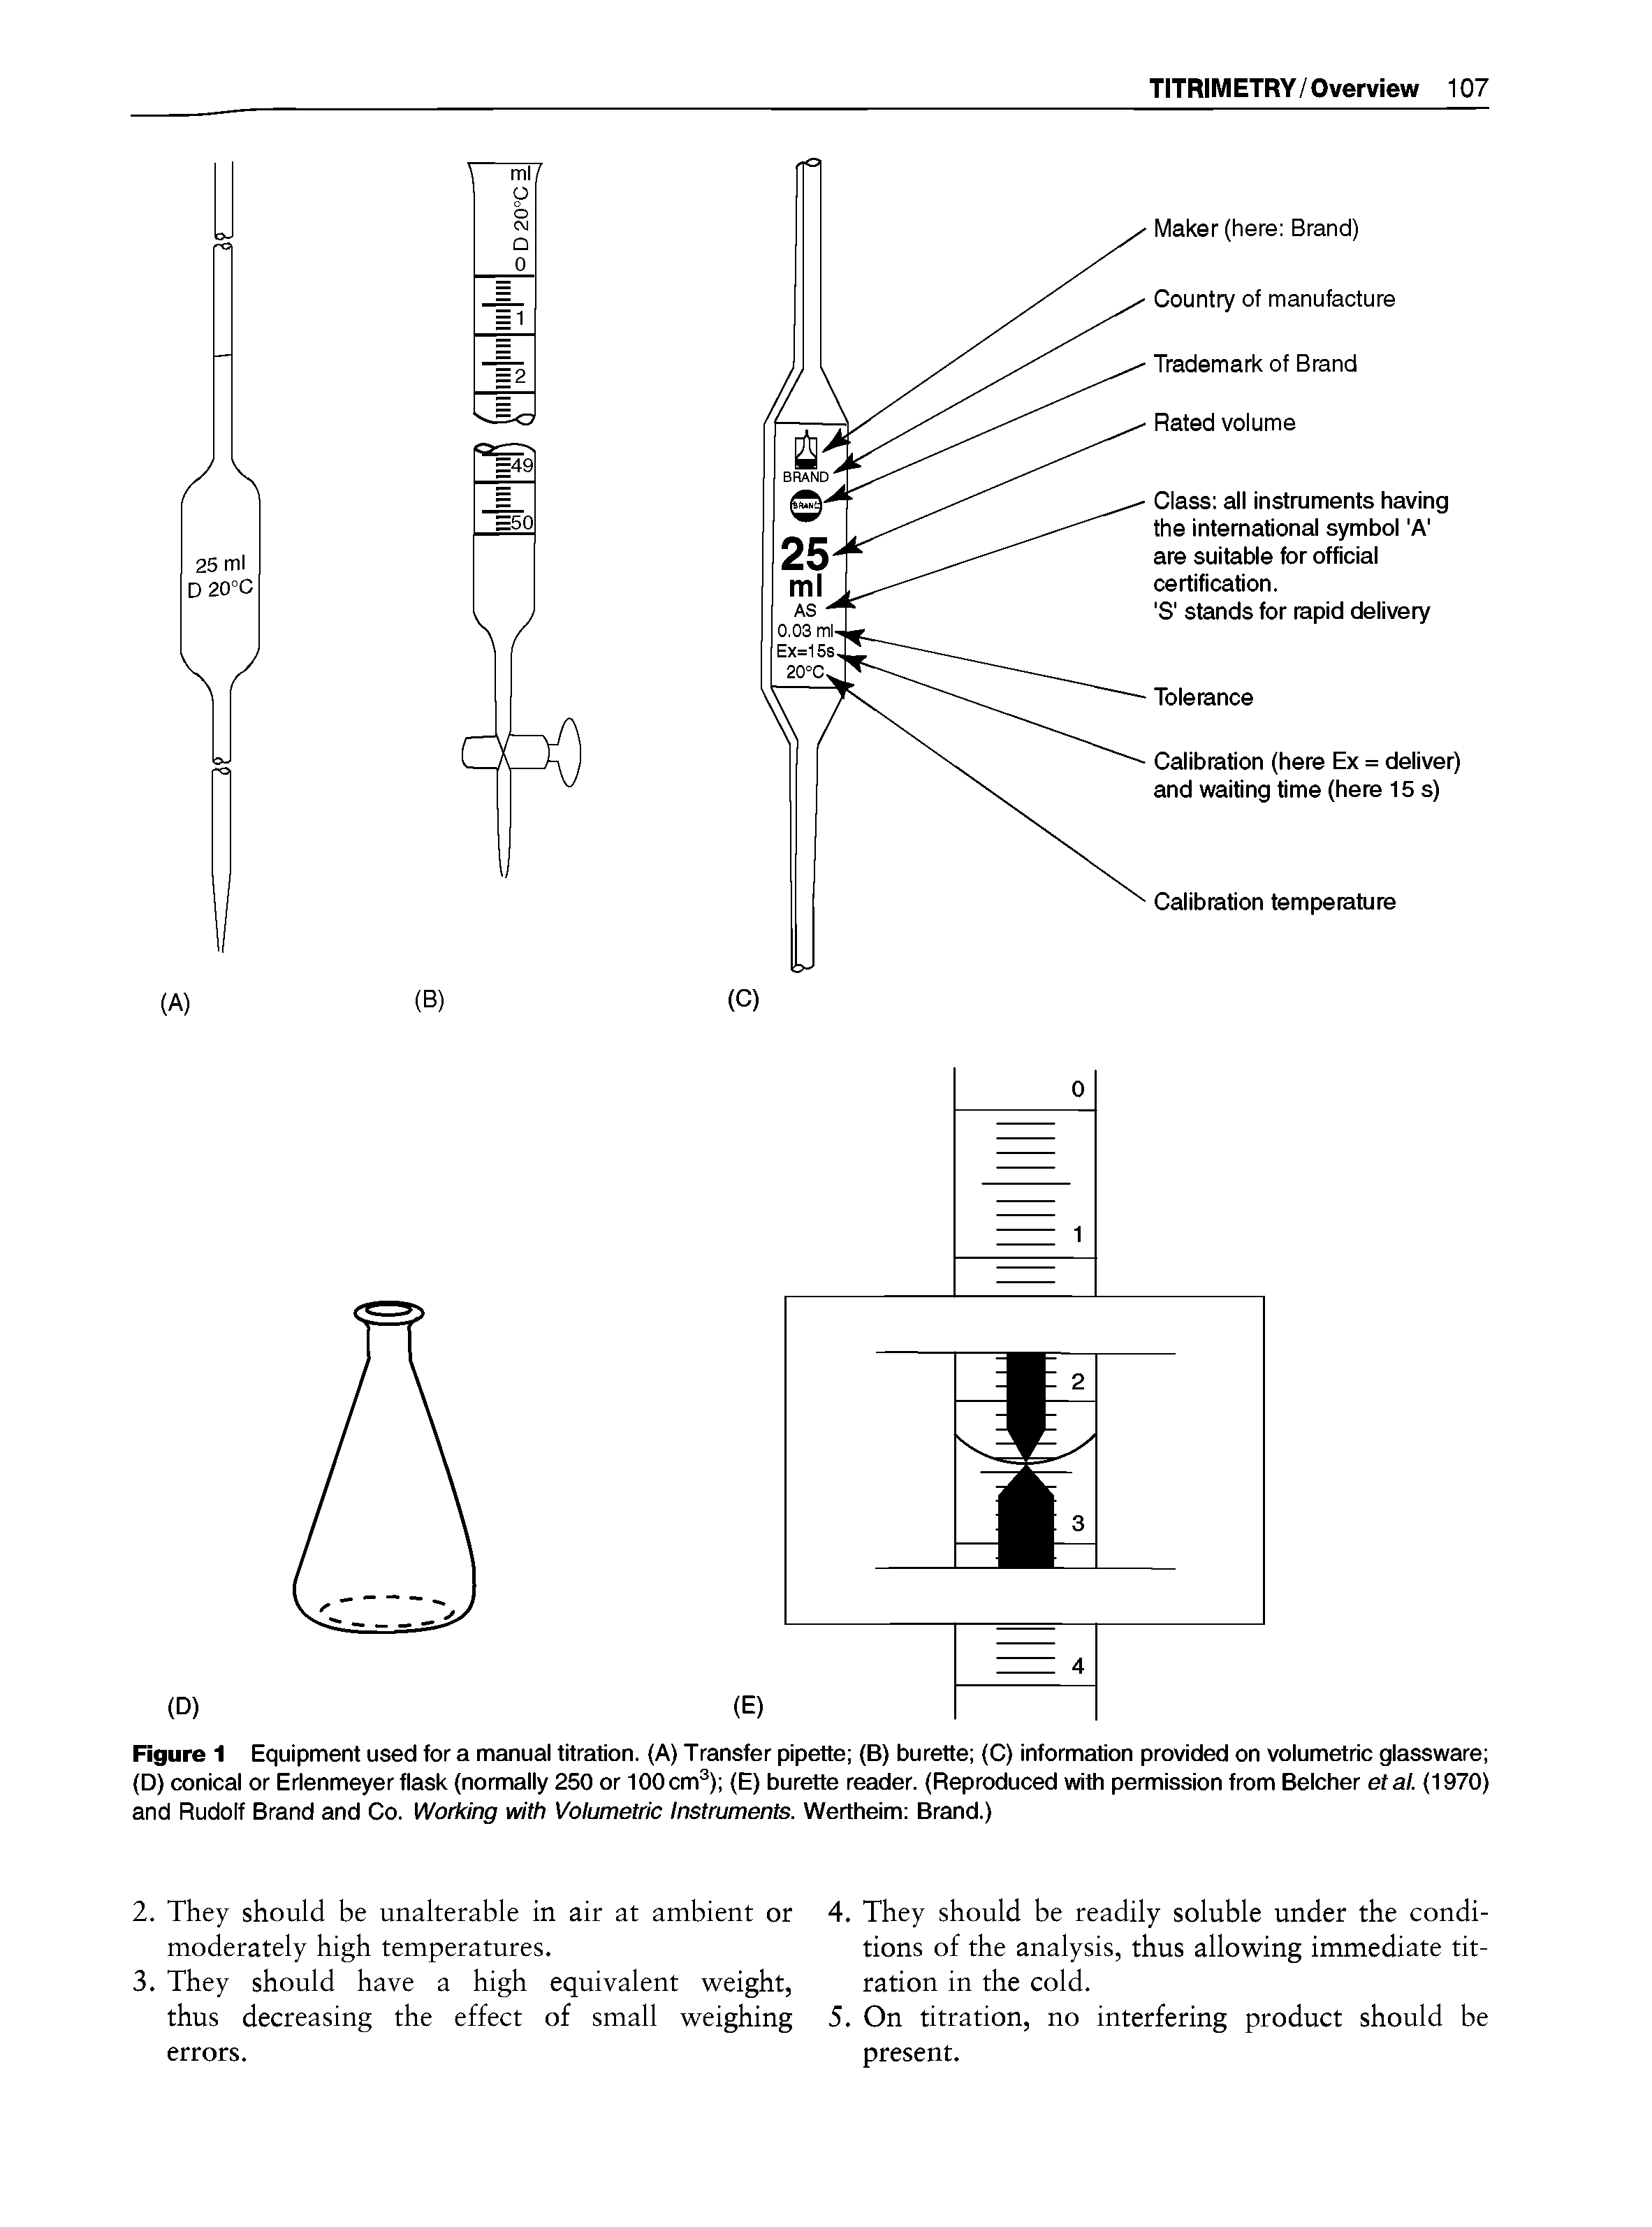 Figure 1 Equipment used for a manual titration. (A) Transfer pipette (B) burette (C) information provided on volumetric glassware (D) conical or Erlenmeyer flask (normally 250 or 100 cm ) (E) burette reader. (Reproduced with permission from Belcher etal. (1970) and Rudolf Brand and Co. Working tMth Volumetric Instruments. Wertheim Brand.)...